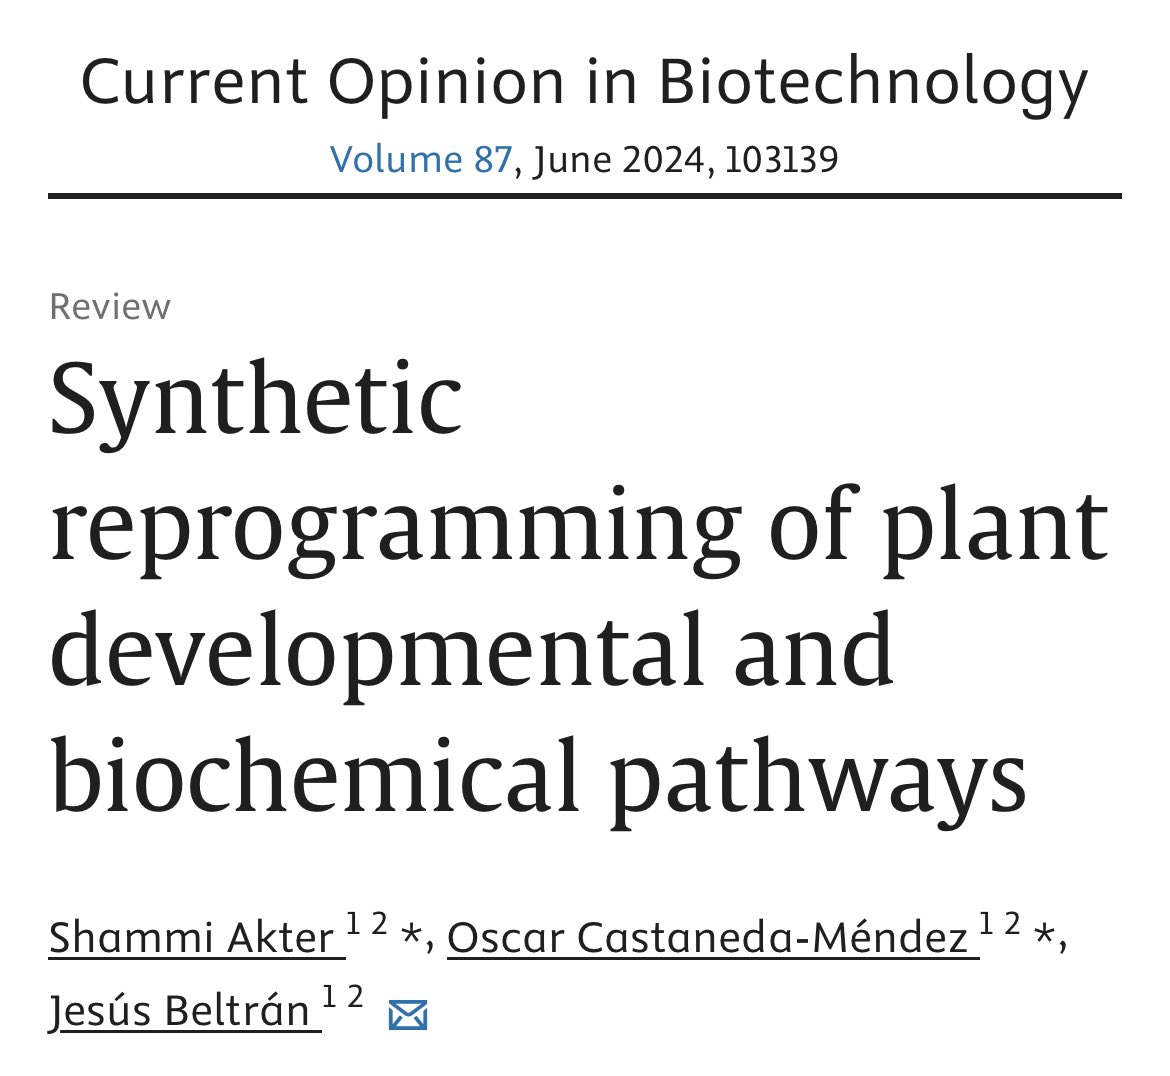 Happy to share our Plant SynBio review in Current Opinion in Biotechnology. 
🌱 🍅 🌾 🧬 🦠 🧫 
Led by our team members Shammi and Oscar! 

authors.elsevier.com/a/1j0DX3PtAV8-…